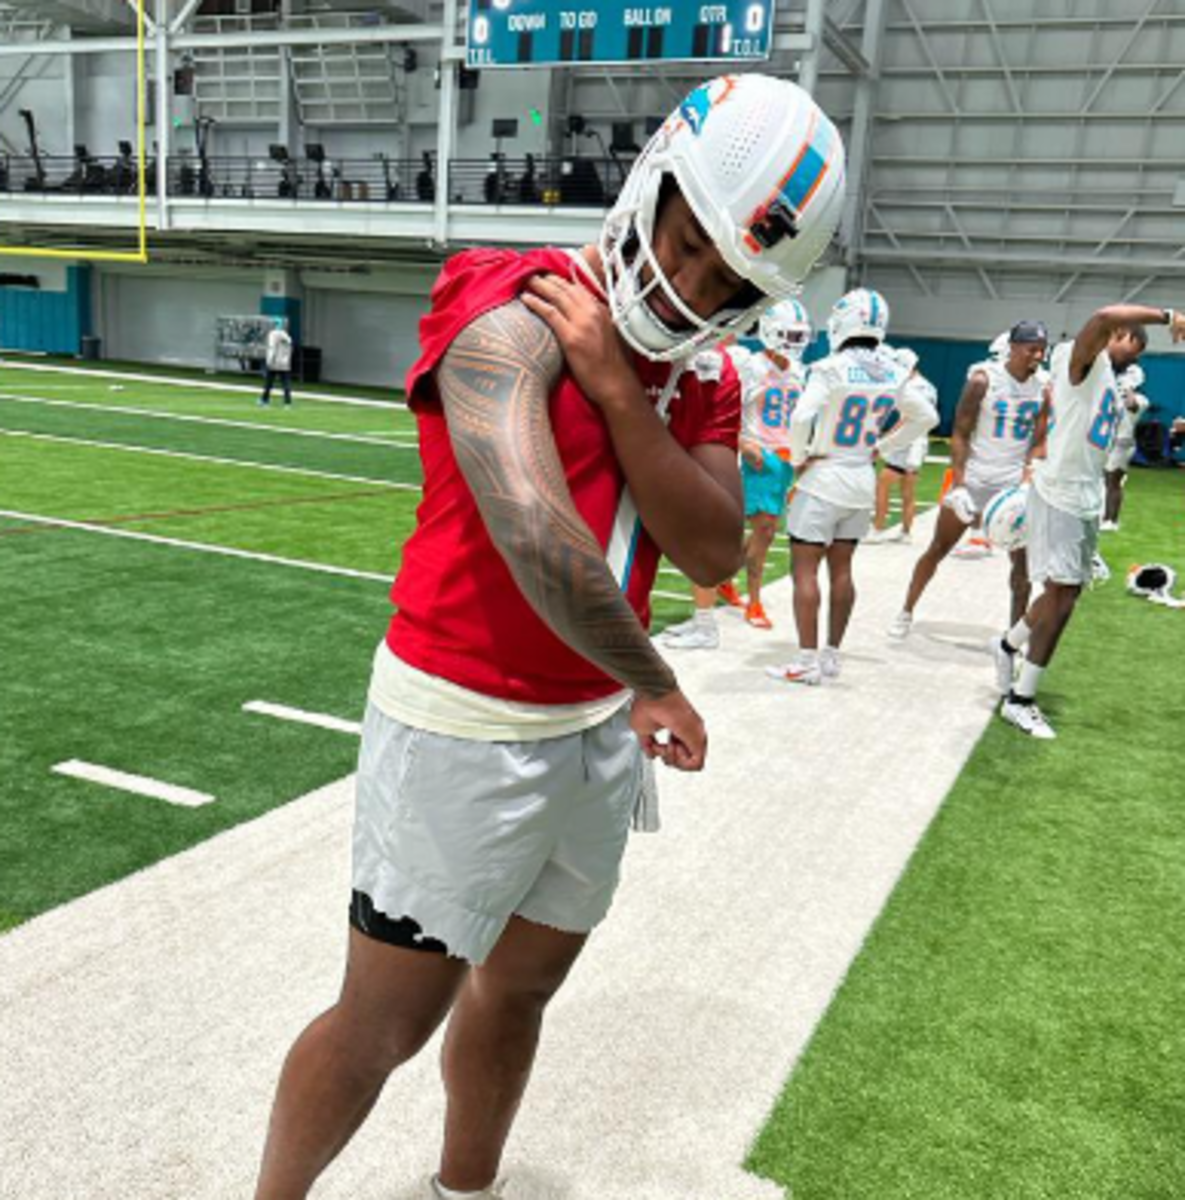 Dolphins' Tua Tagovailoa Shows off New Arm Sleeve Tattoo in Training Camp  Photo, News, Scores, Highlights, Stats, and Rumors